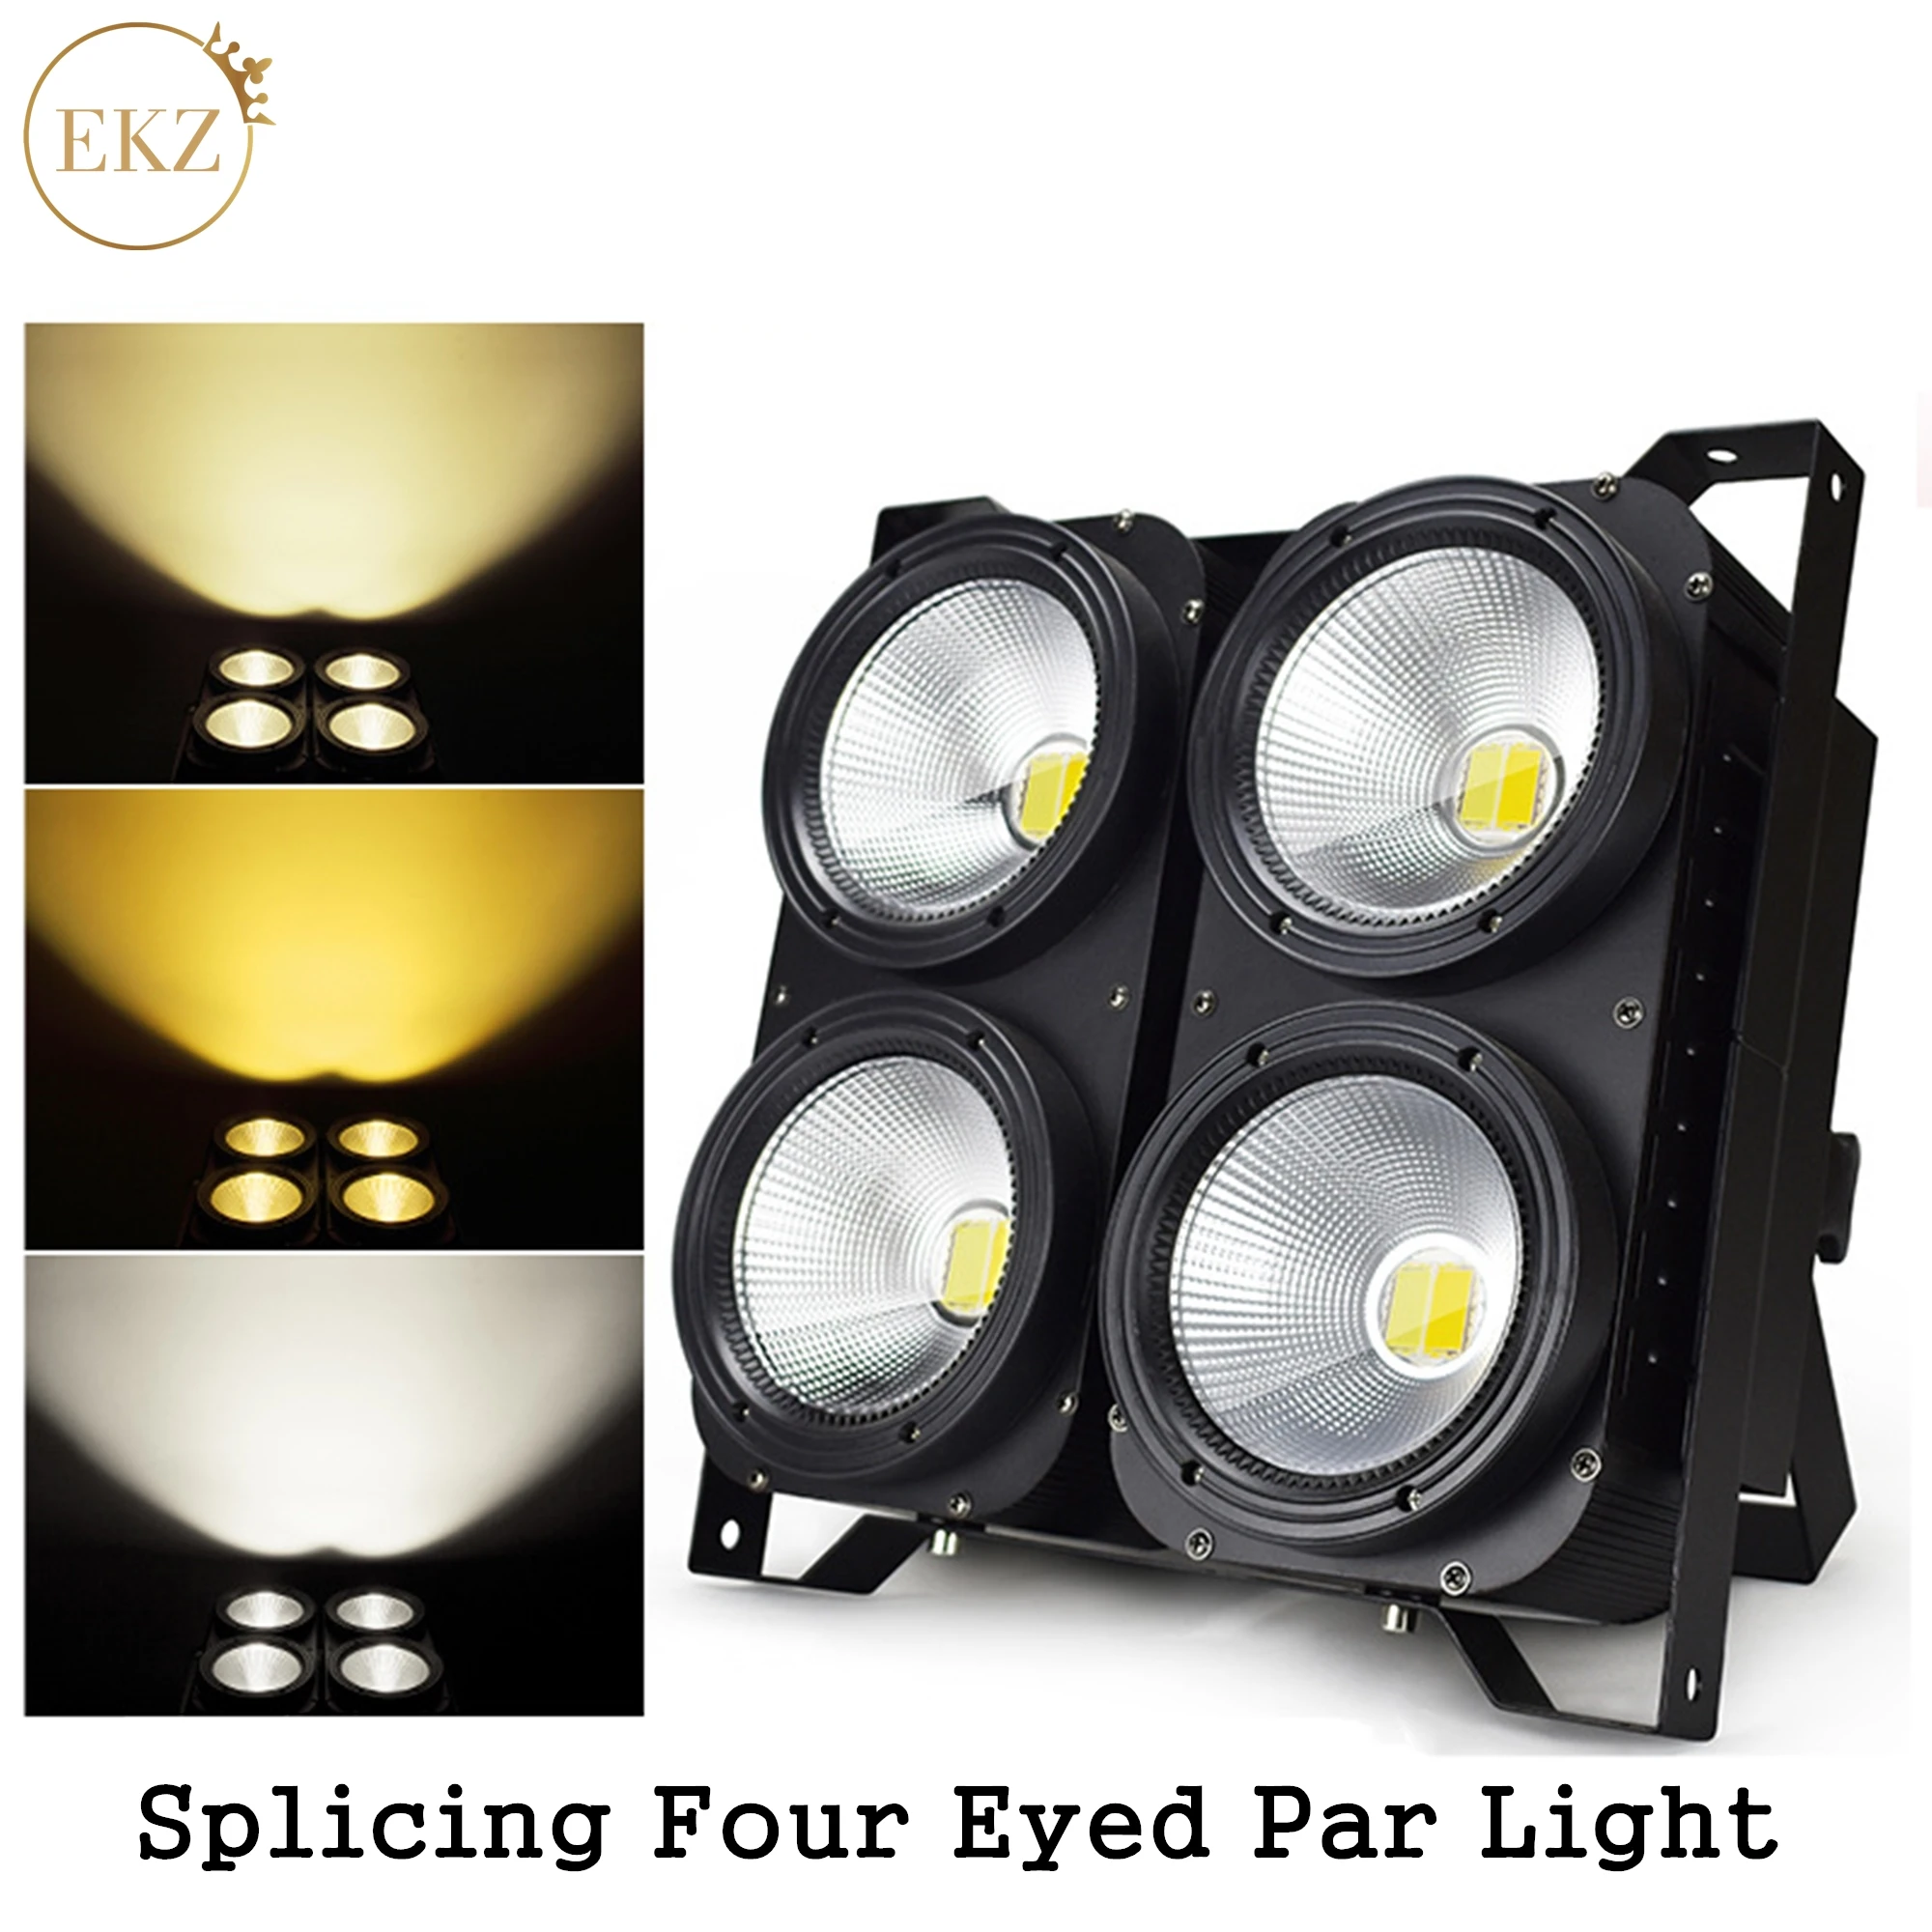 

High Quality 400W COB Combination 4x100W 2In1 Led Blinder Light Warm White Cool White Audience Stage Studio Lamp DJ Show Floor